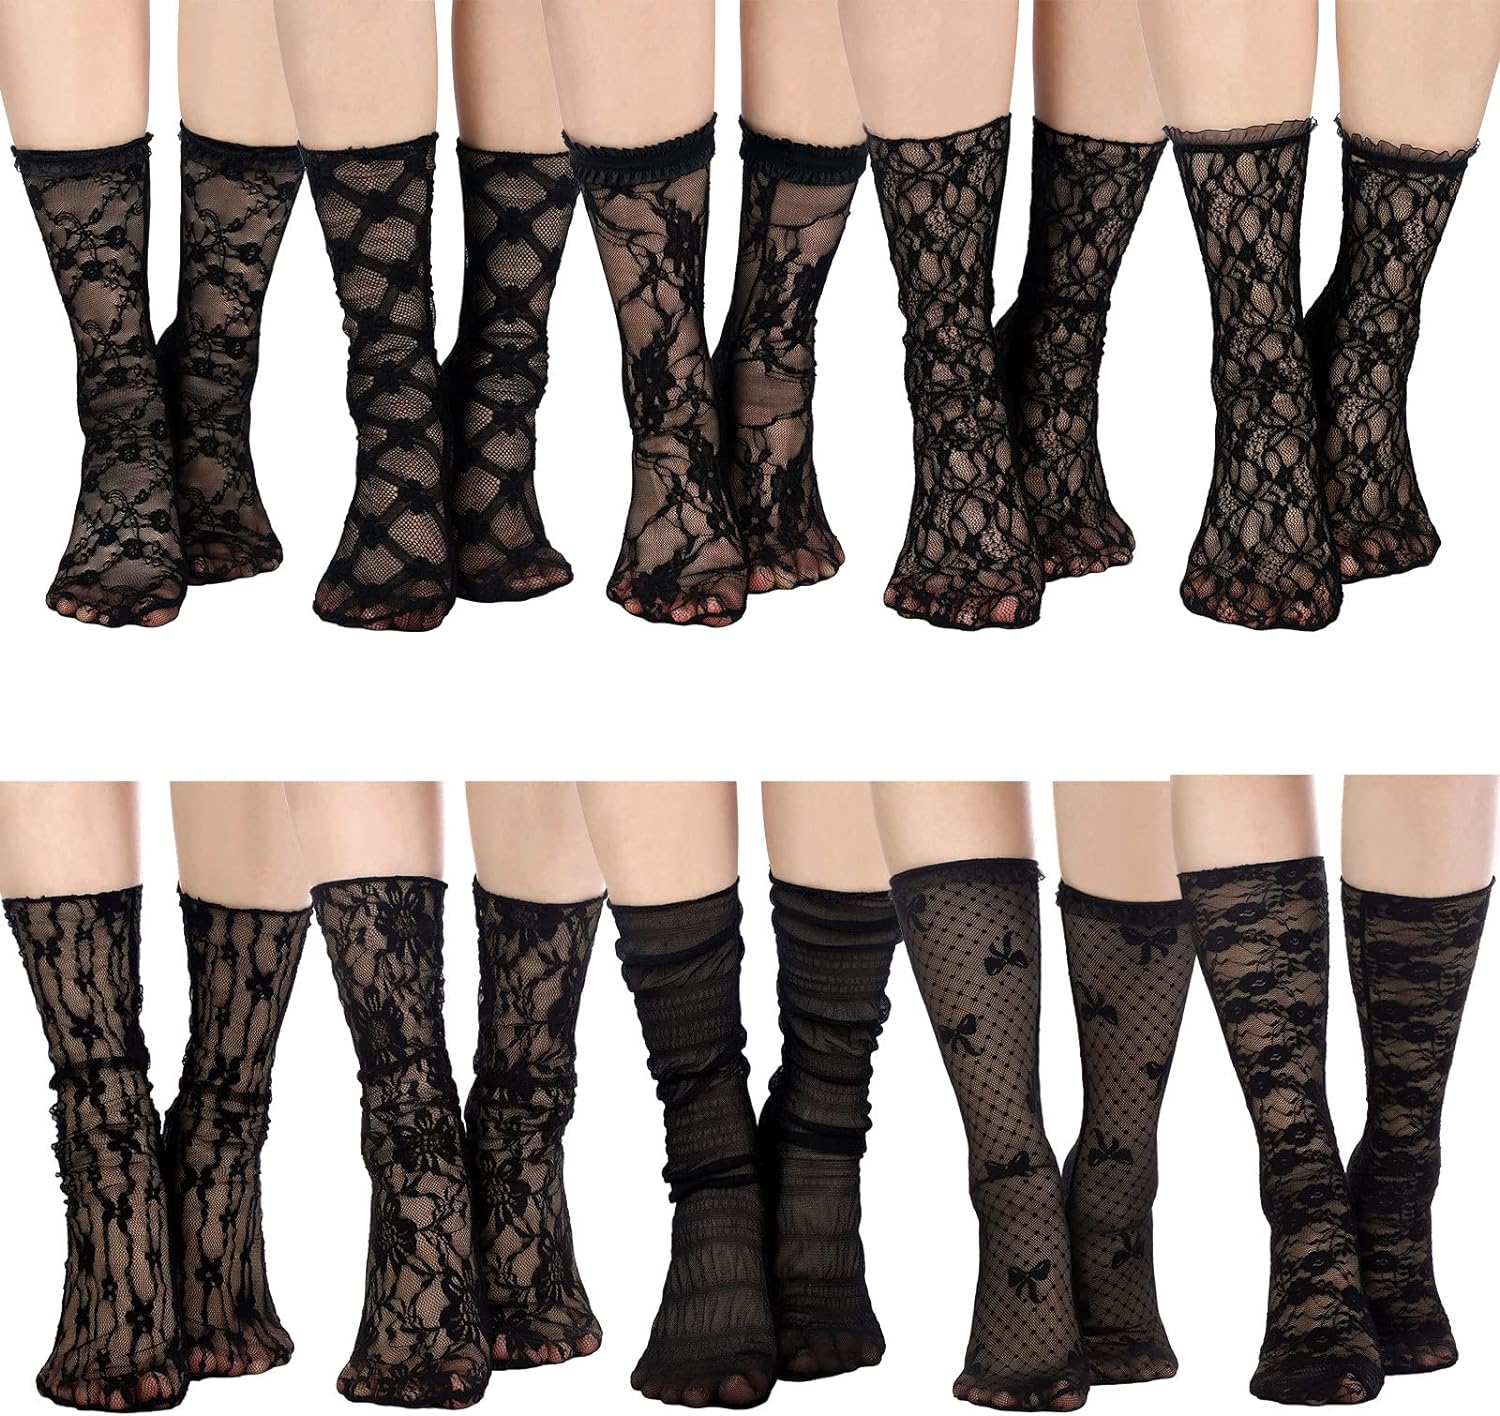 Geyoga 10 Pairs Slouch Lace Socks Women Cute Mesh Frilly Socks Ankle High Loose Lace Ruffle Socks for Women Girls Dress